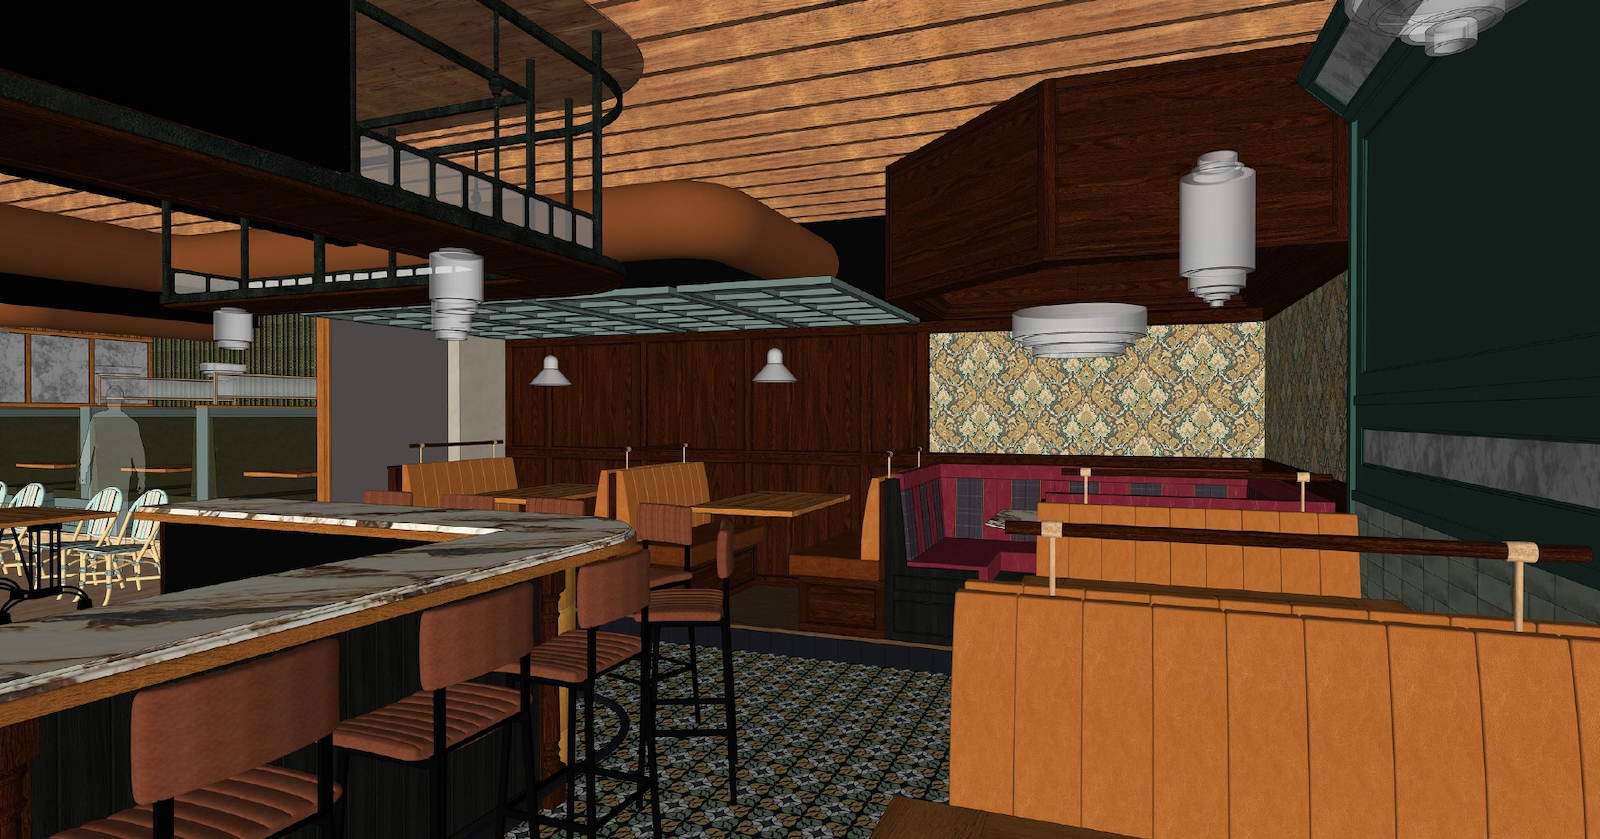 Cafe Benelux rendering More booths, VIP booth